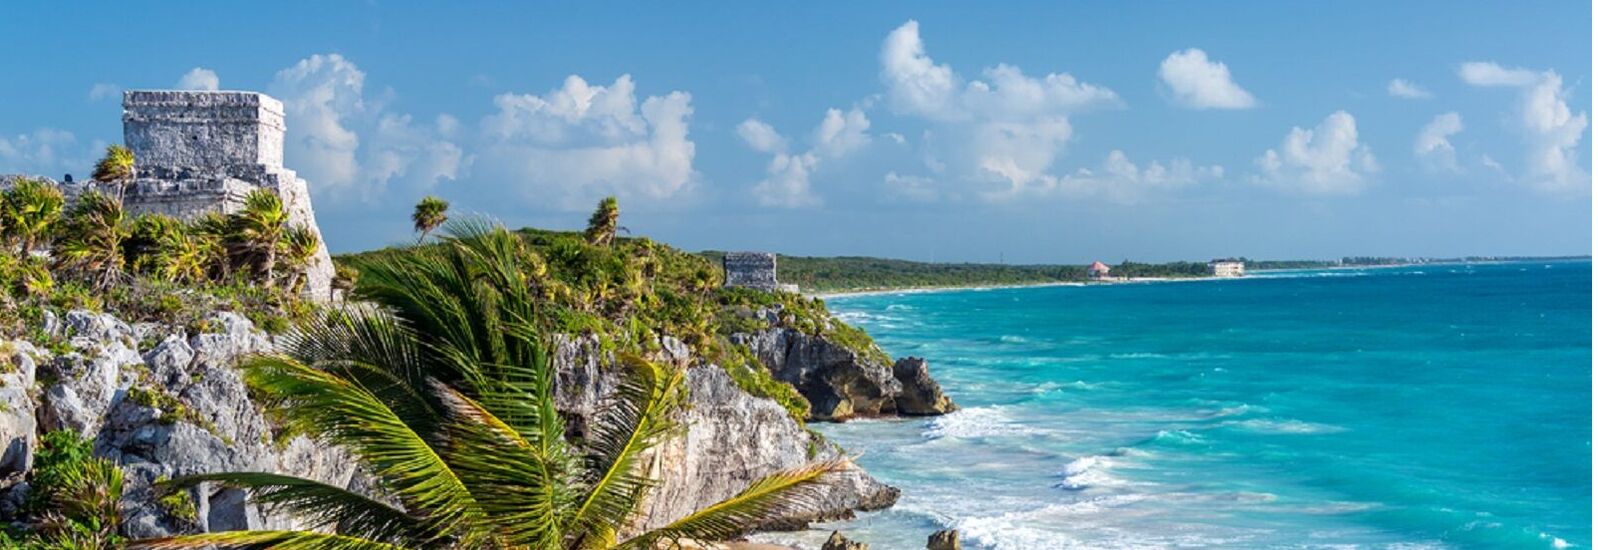 View of beach and ancient ruins in Tulum, Mexico 